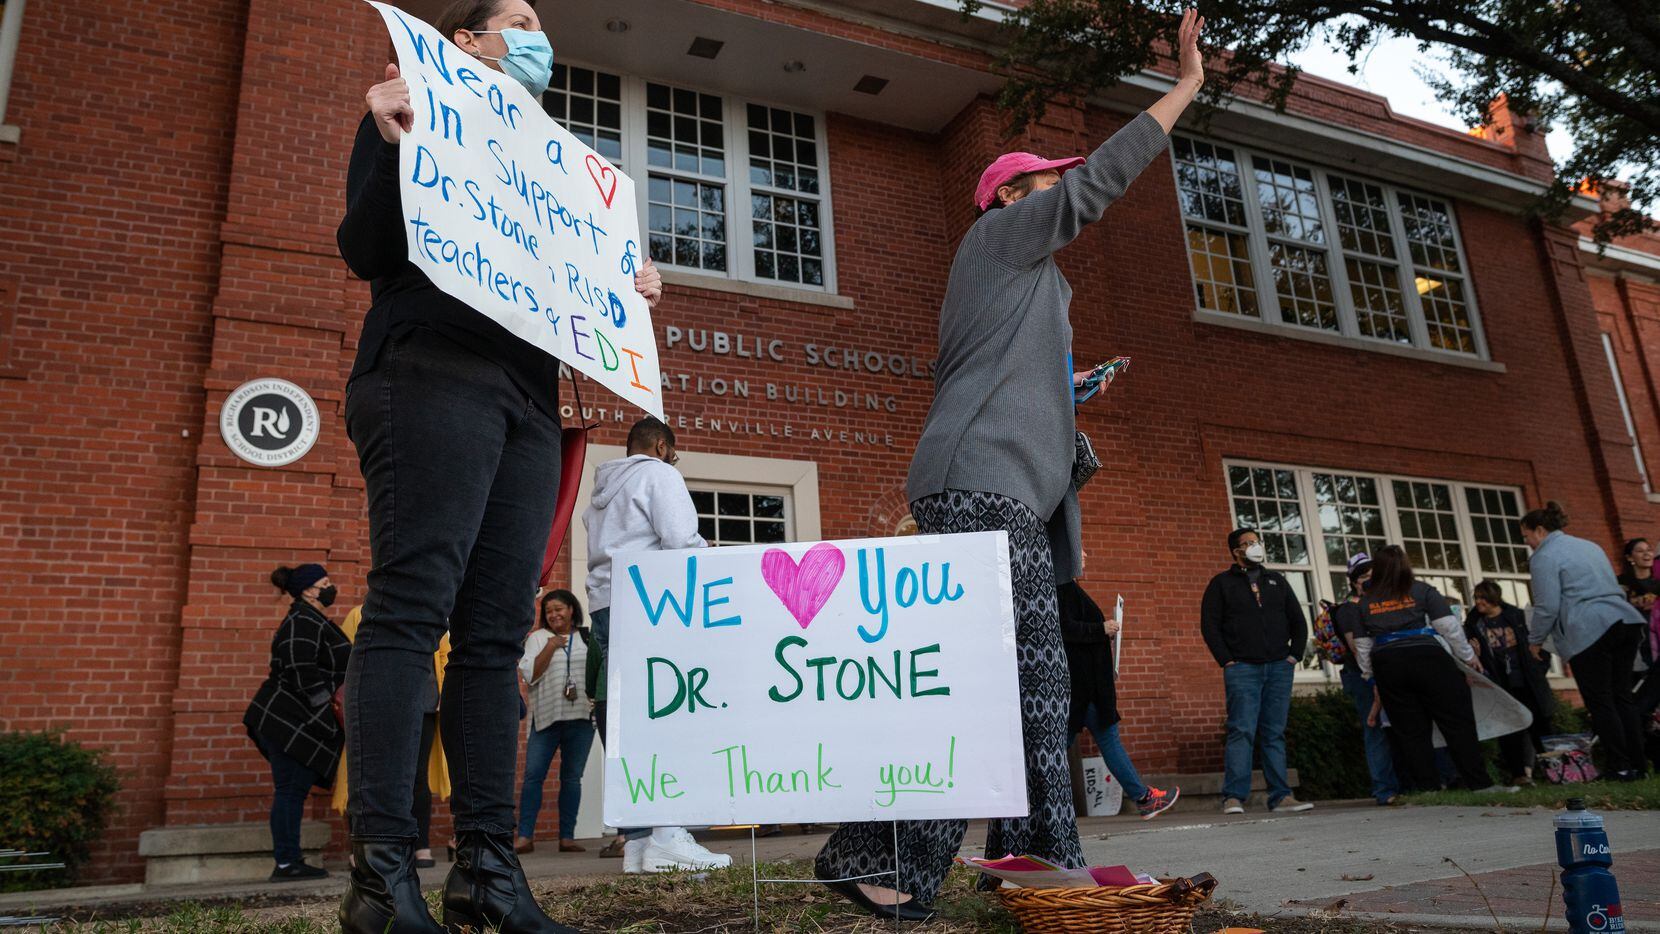 Ellen Alexandrakis, left, and Lowry Manders stand while holding signs in support of RISD...